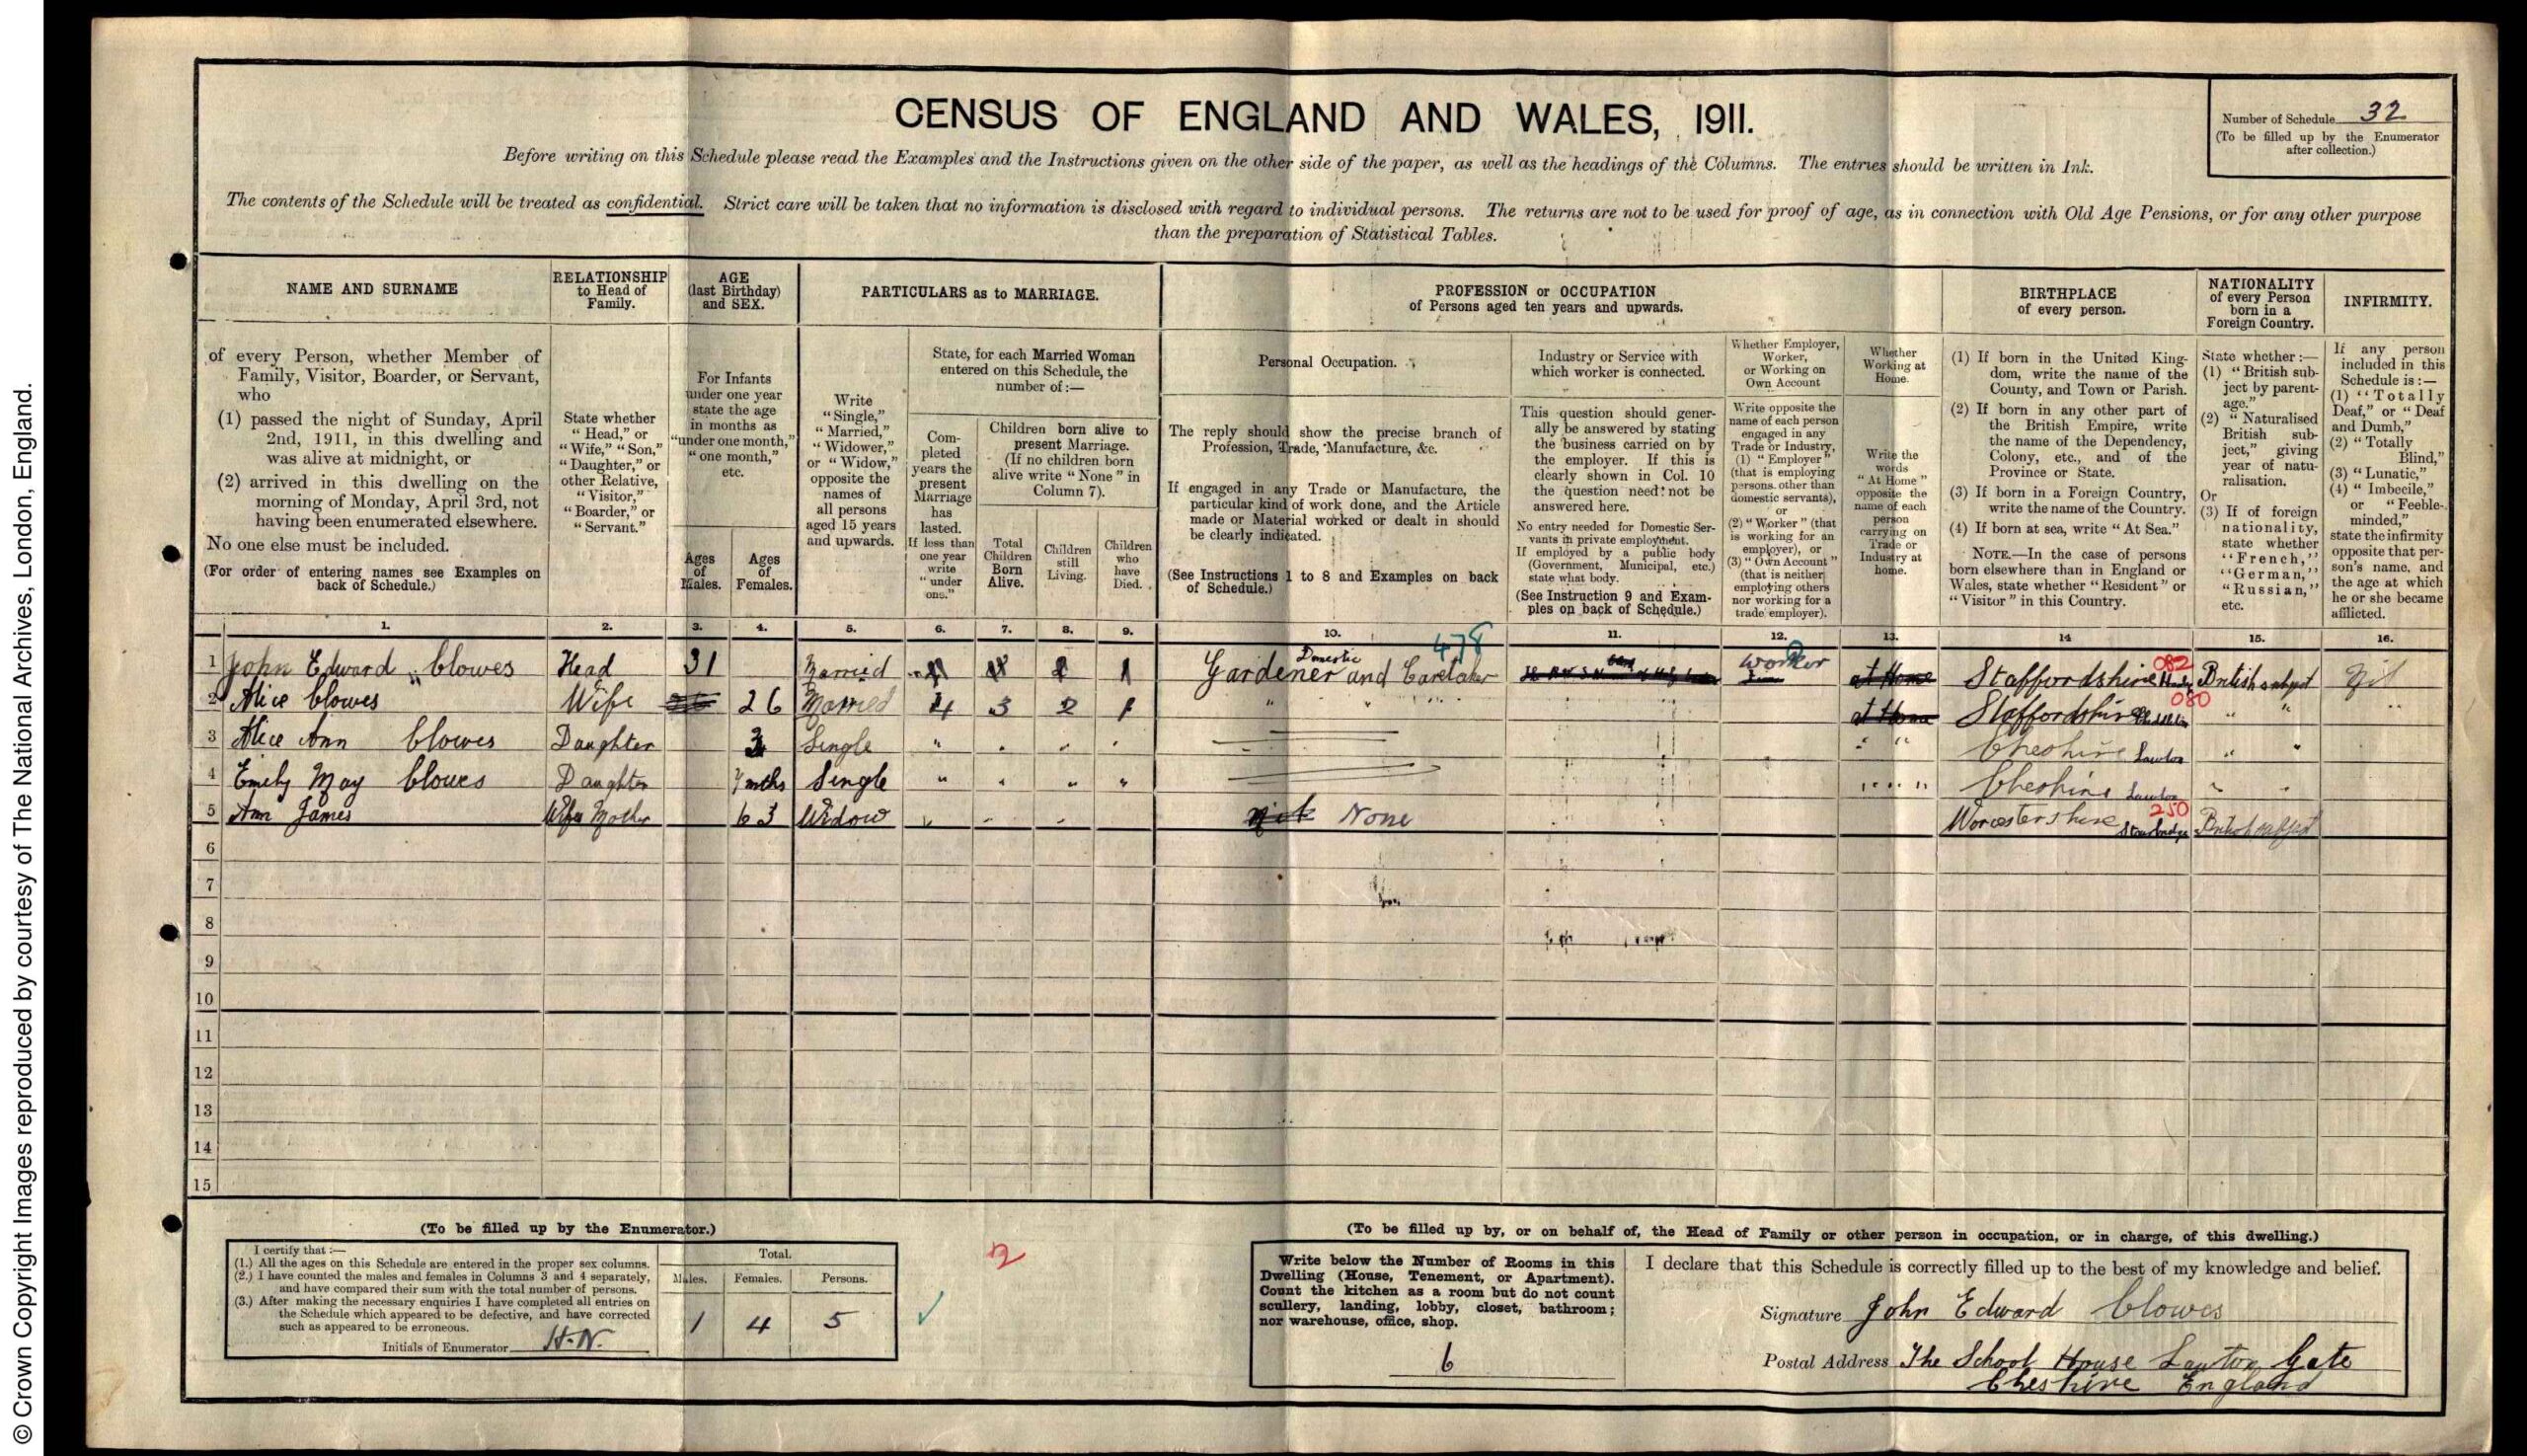 1911 Census entry for the Clowes family